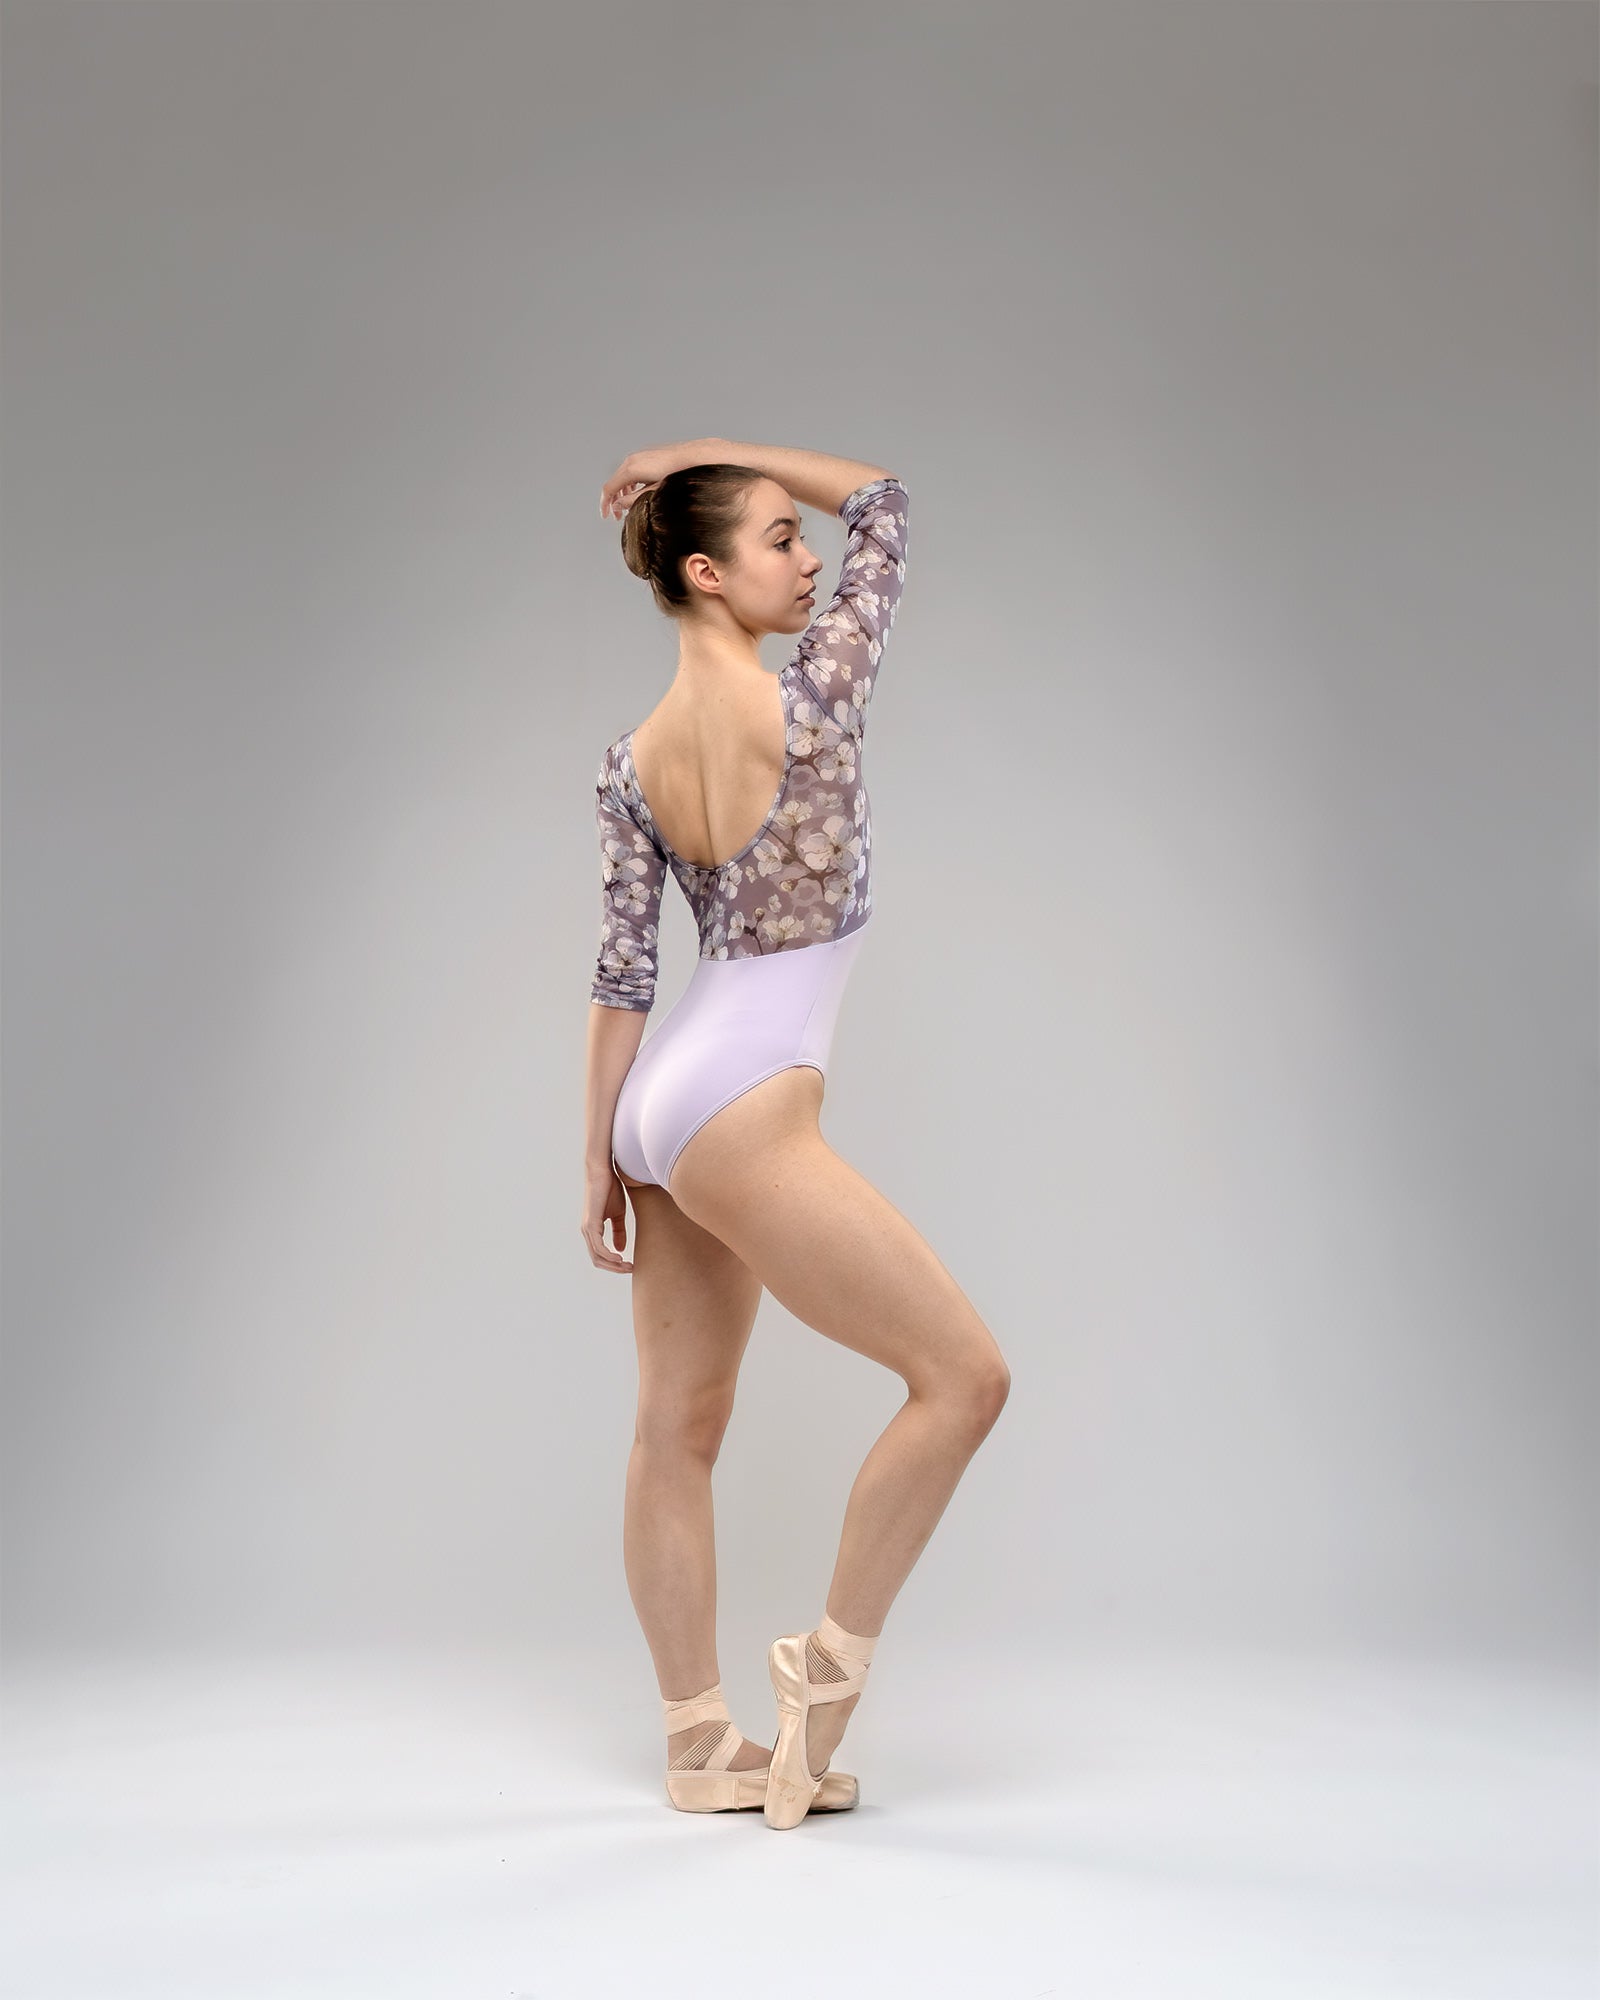 Ballet dancer wearing lilac leotard With long sleeves, floral print mash upper body lilac white and purple